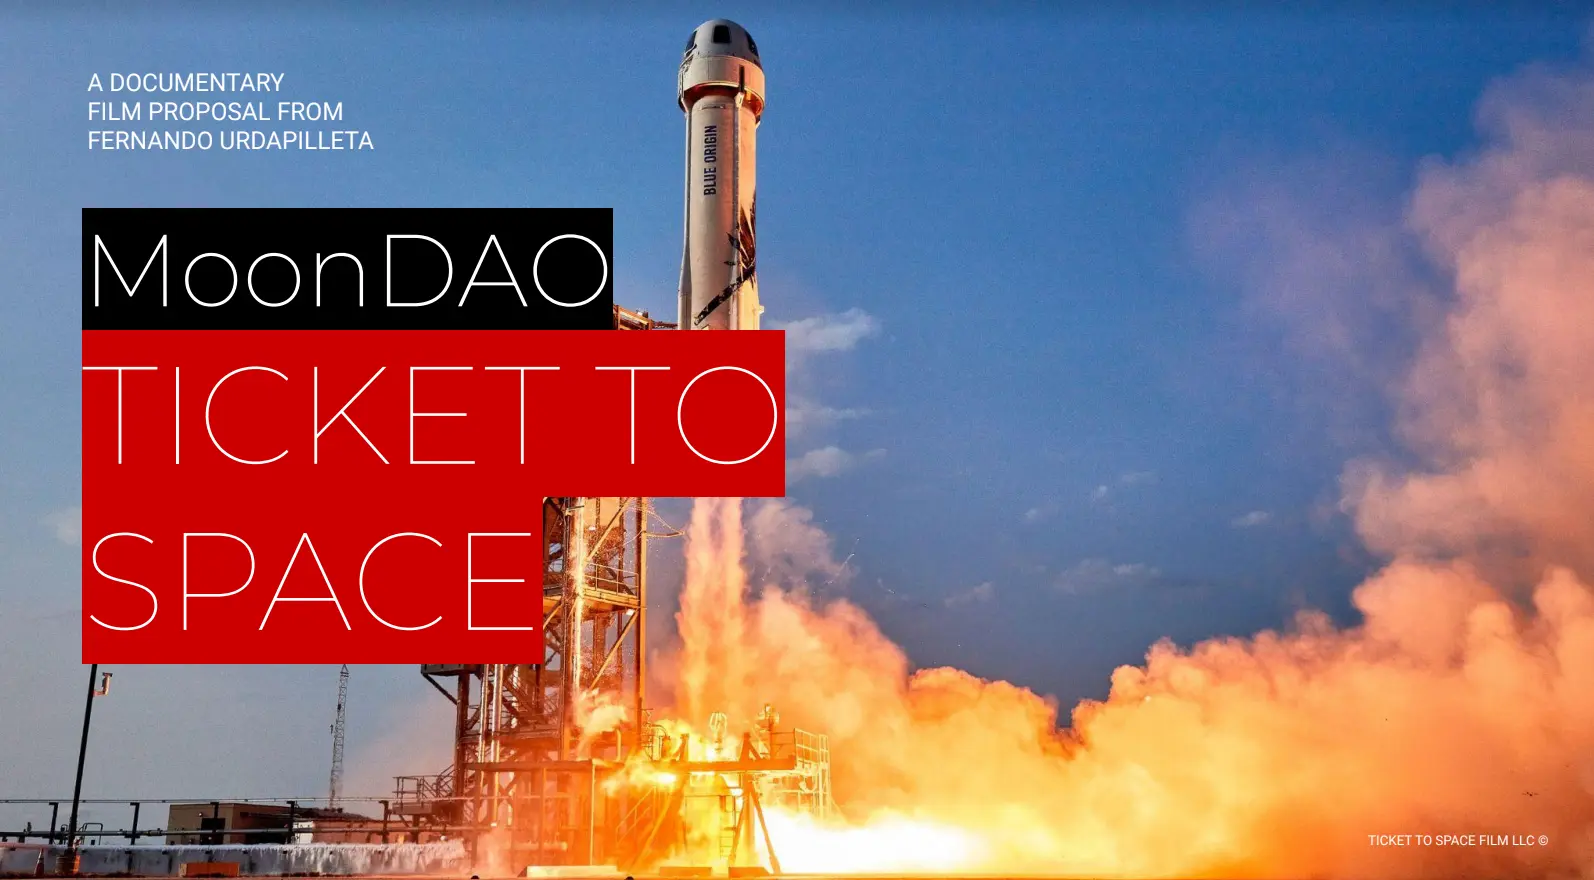 Ticket To Space documentary proposal in MoonDAO